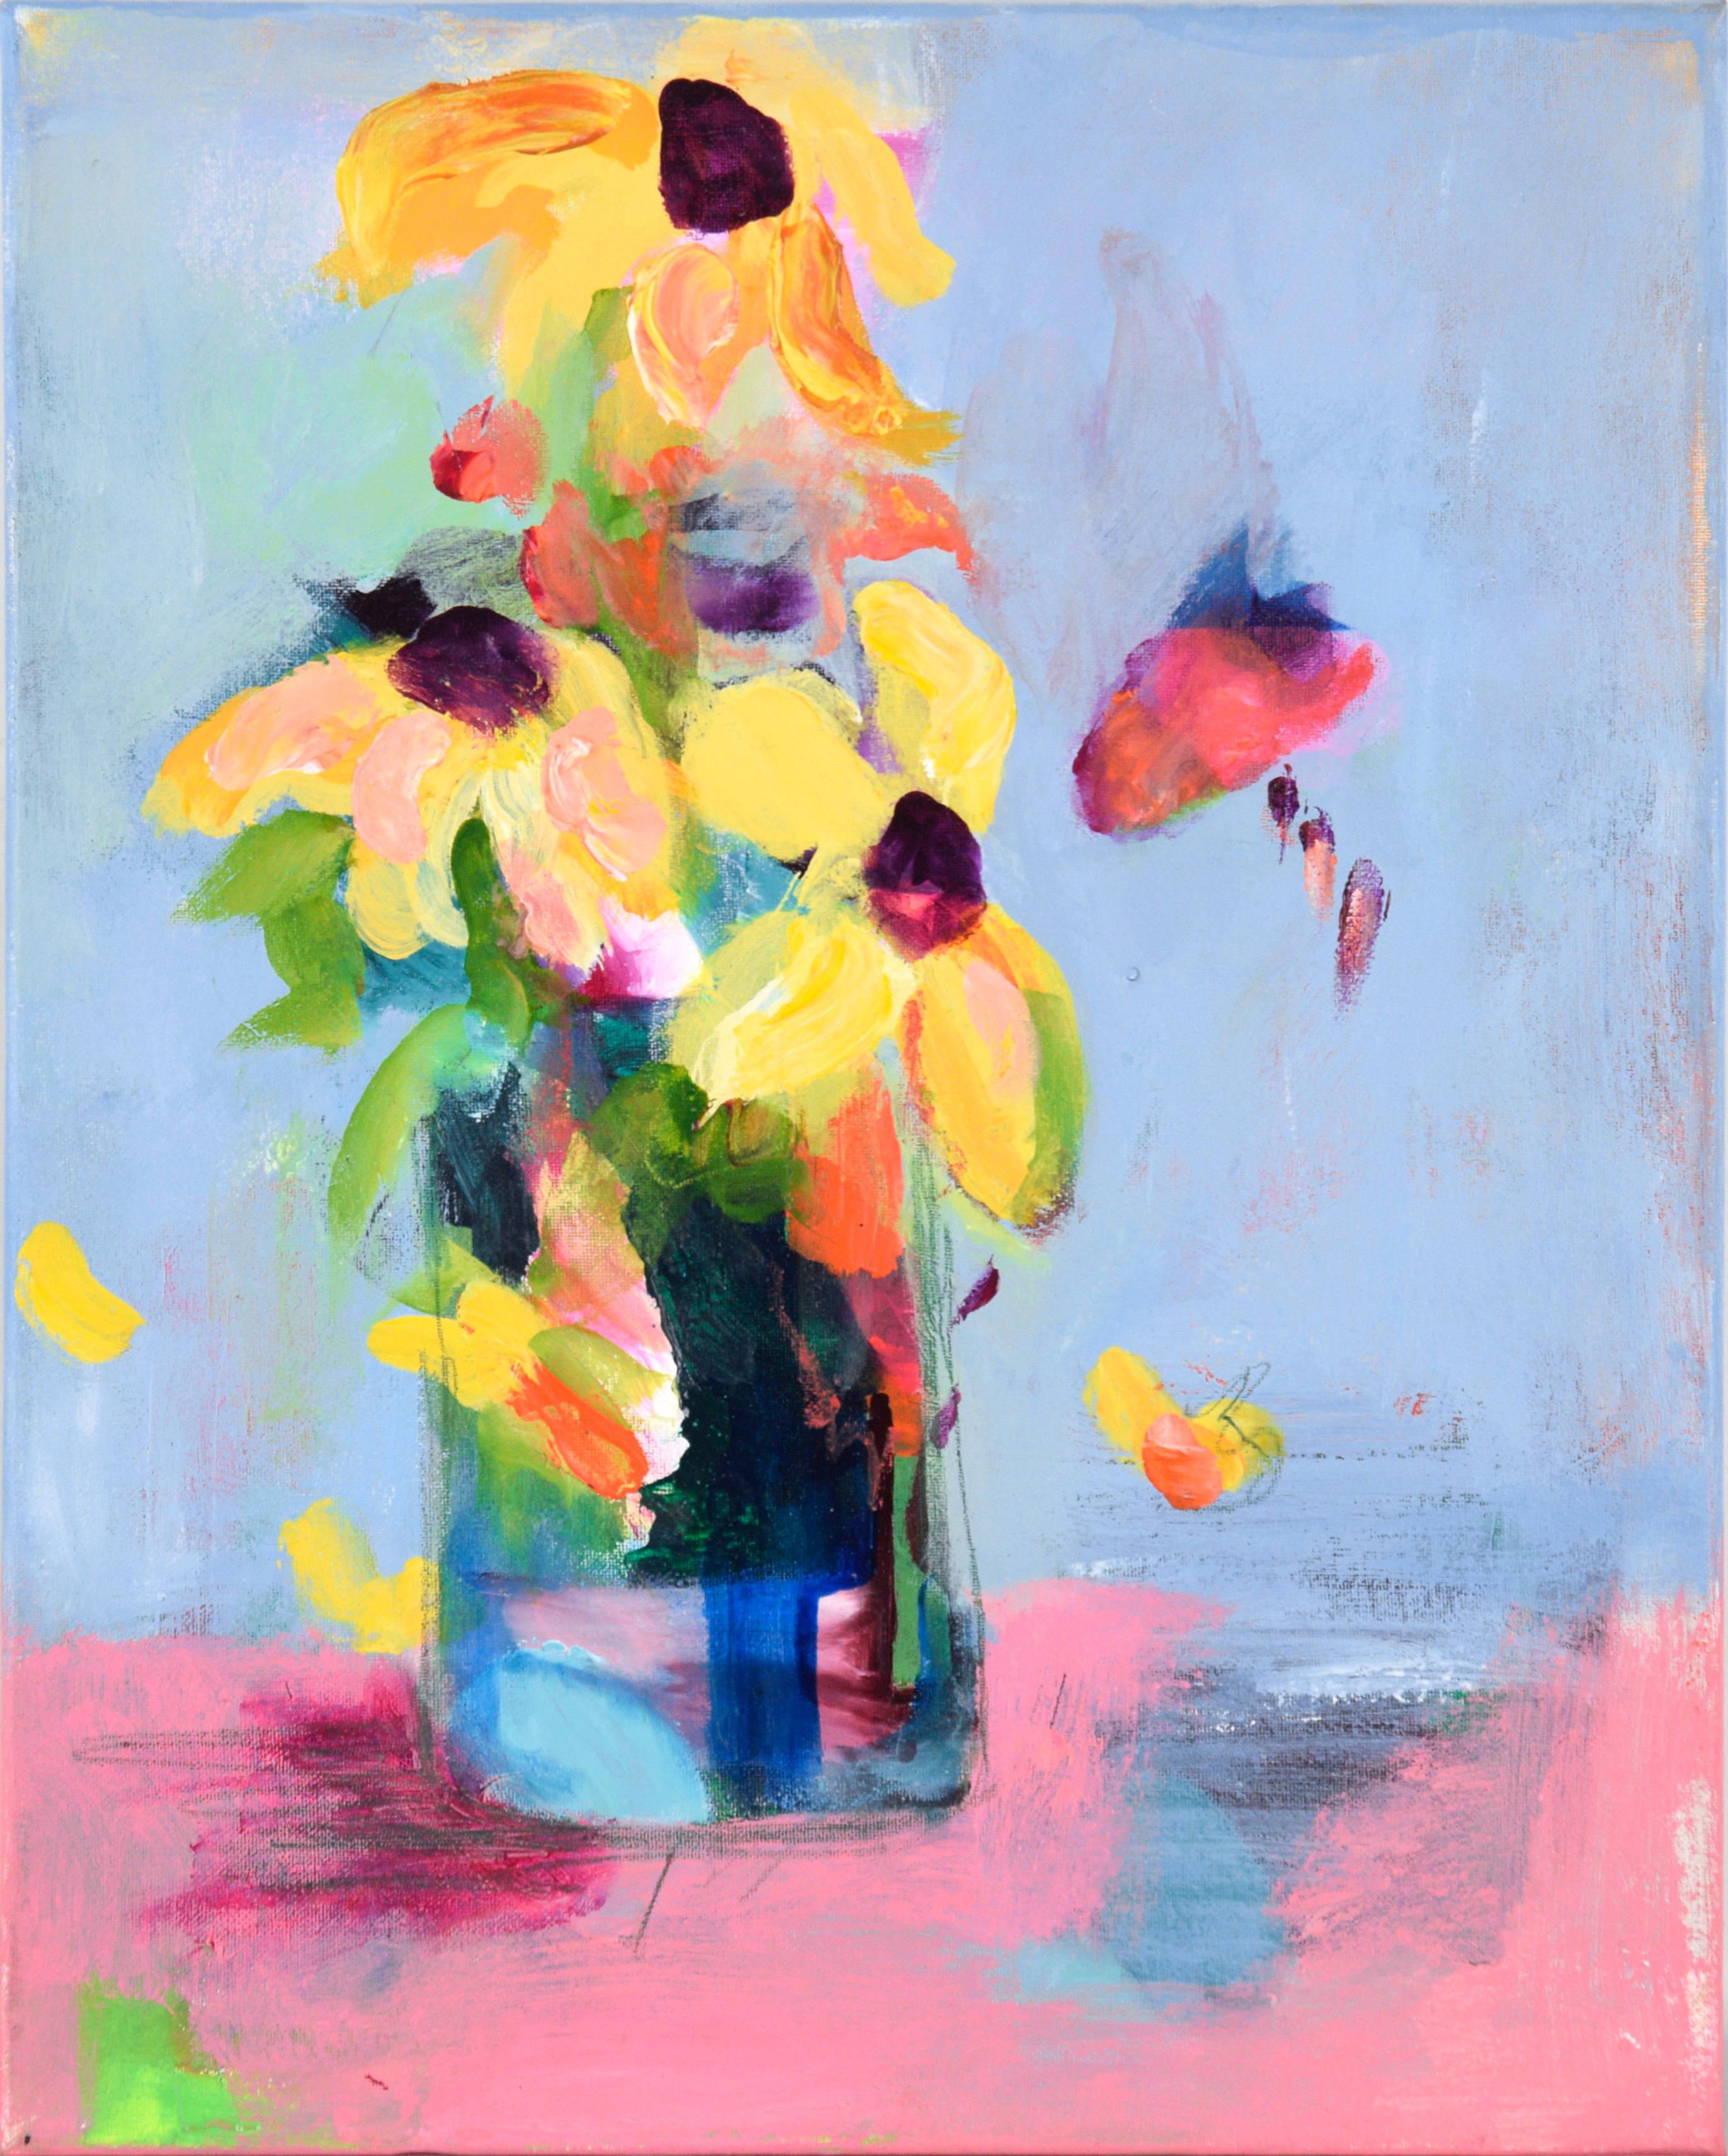 Ilana Ingber Abstract Painting - "Petals Falling From a Bouquet" - Still Life